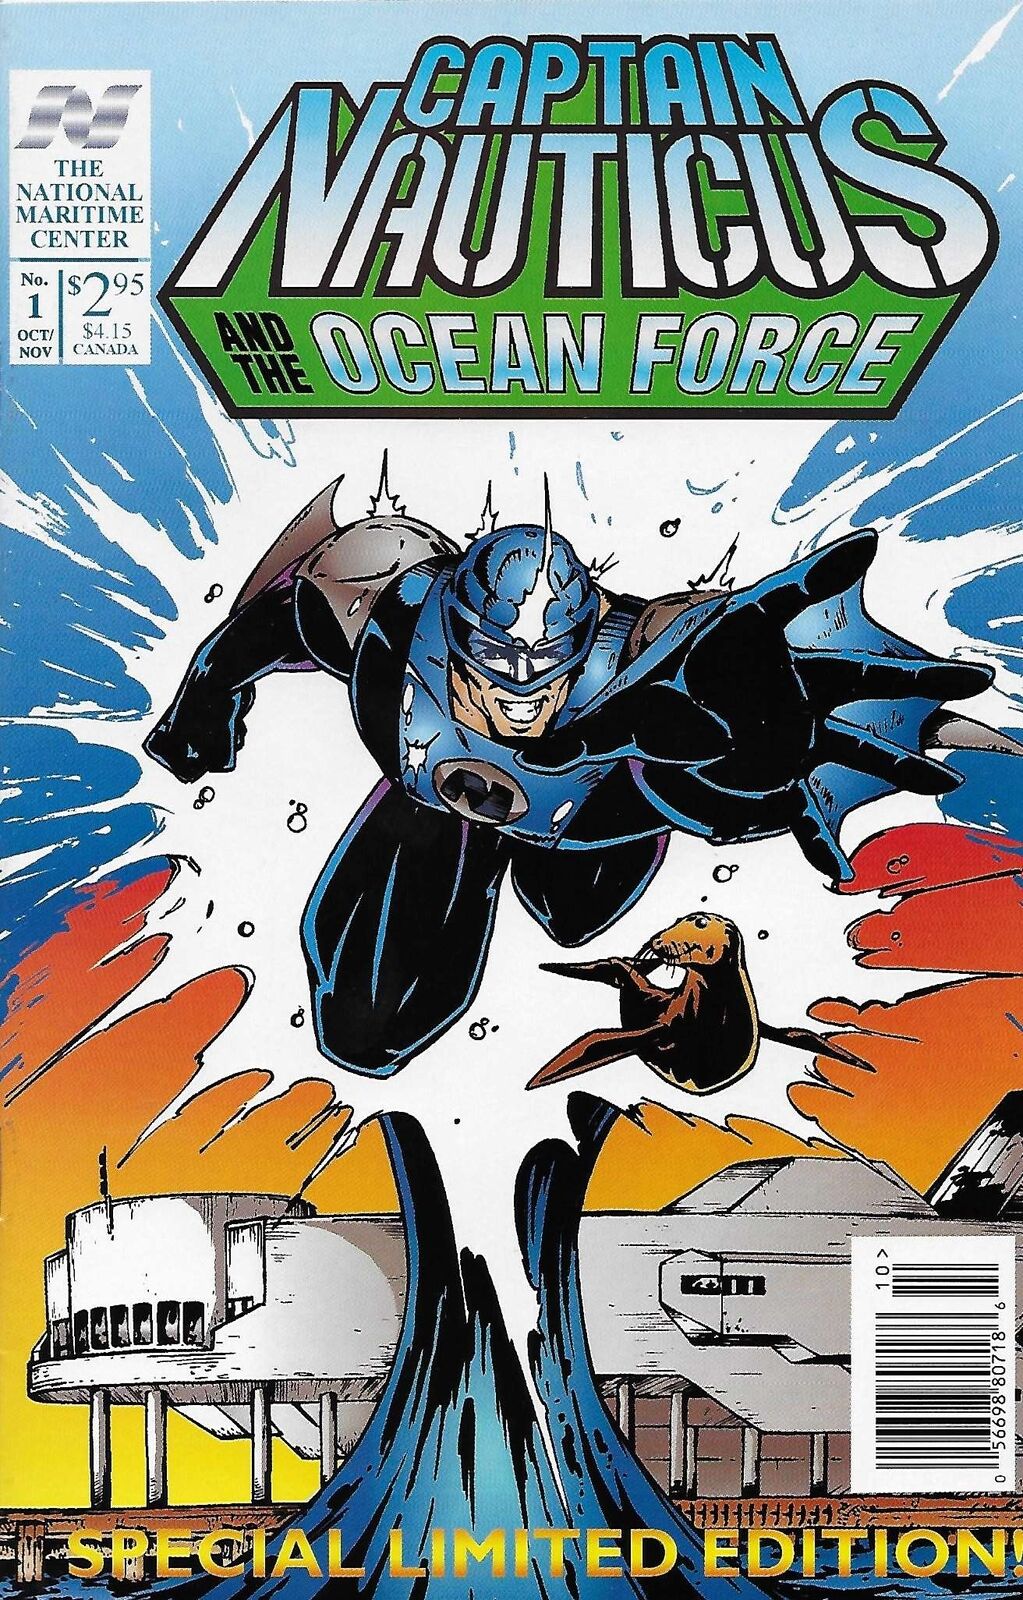 Captain Nauticus And the Ocean Force #1 (Newsstand) VF/NM; National Maritime Cen